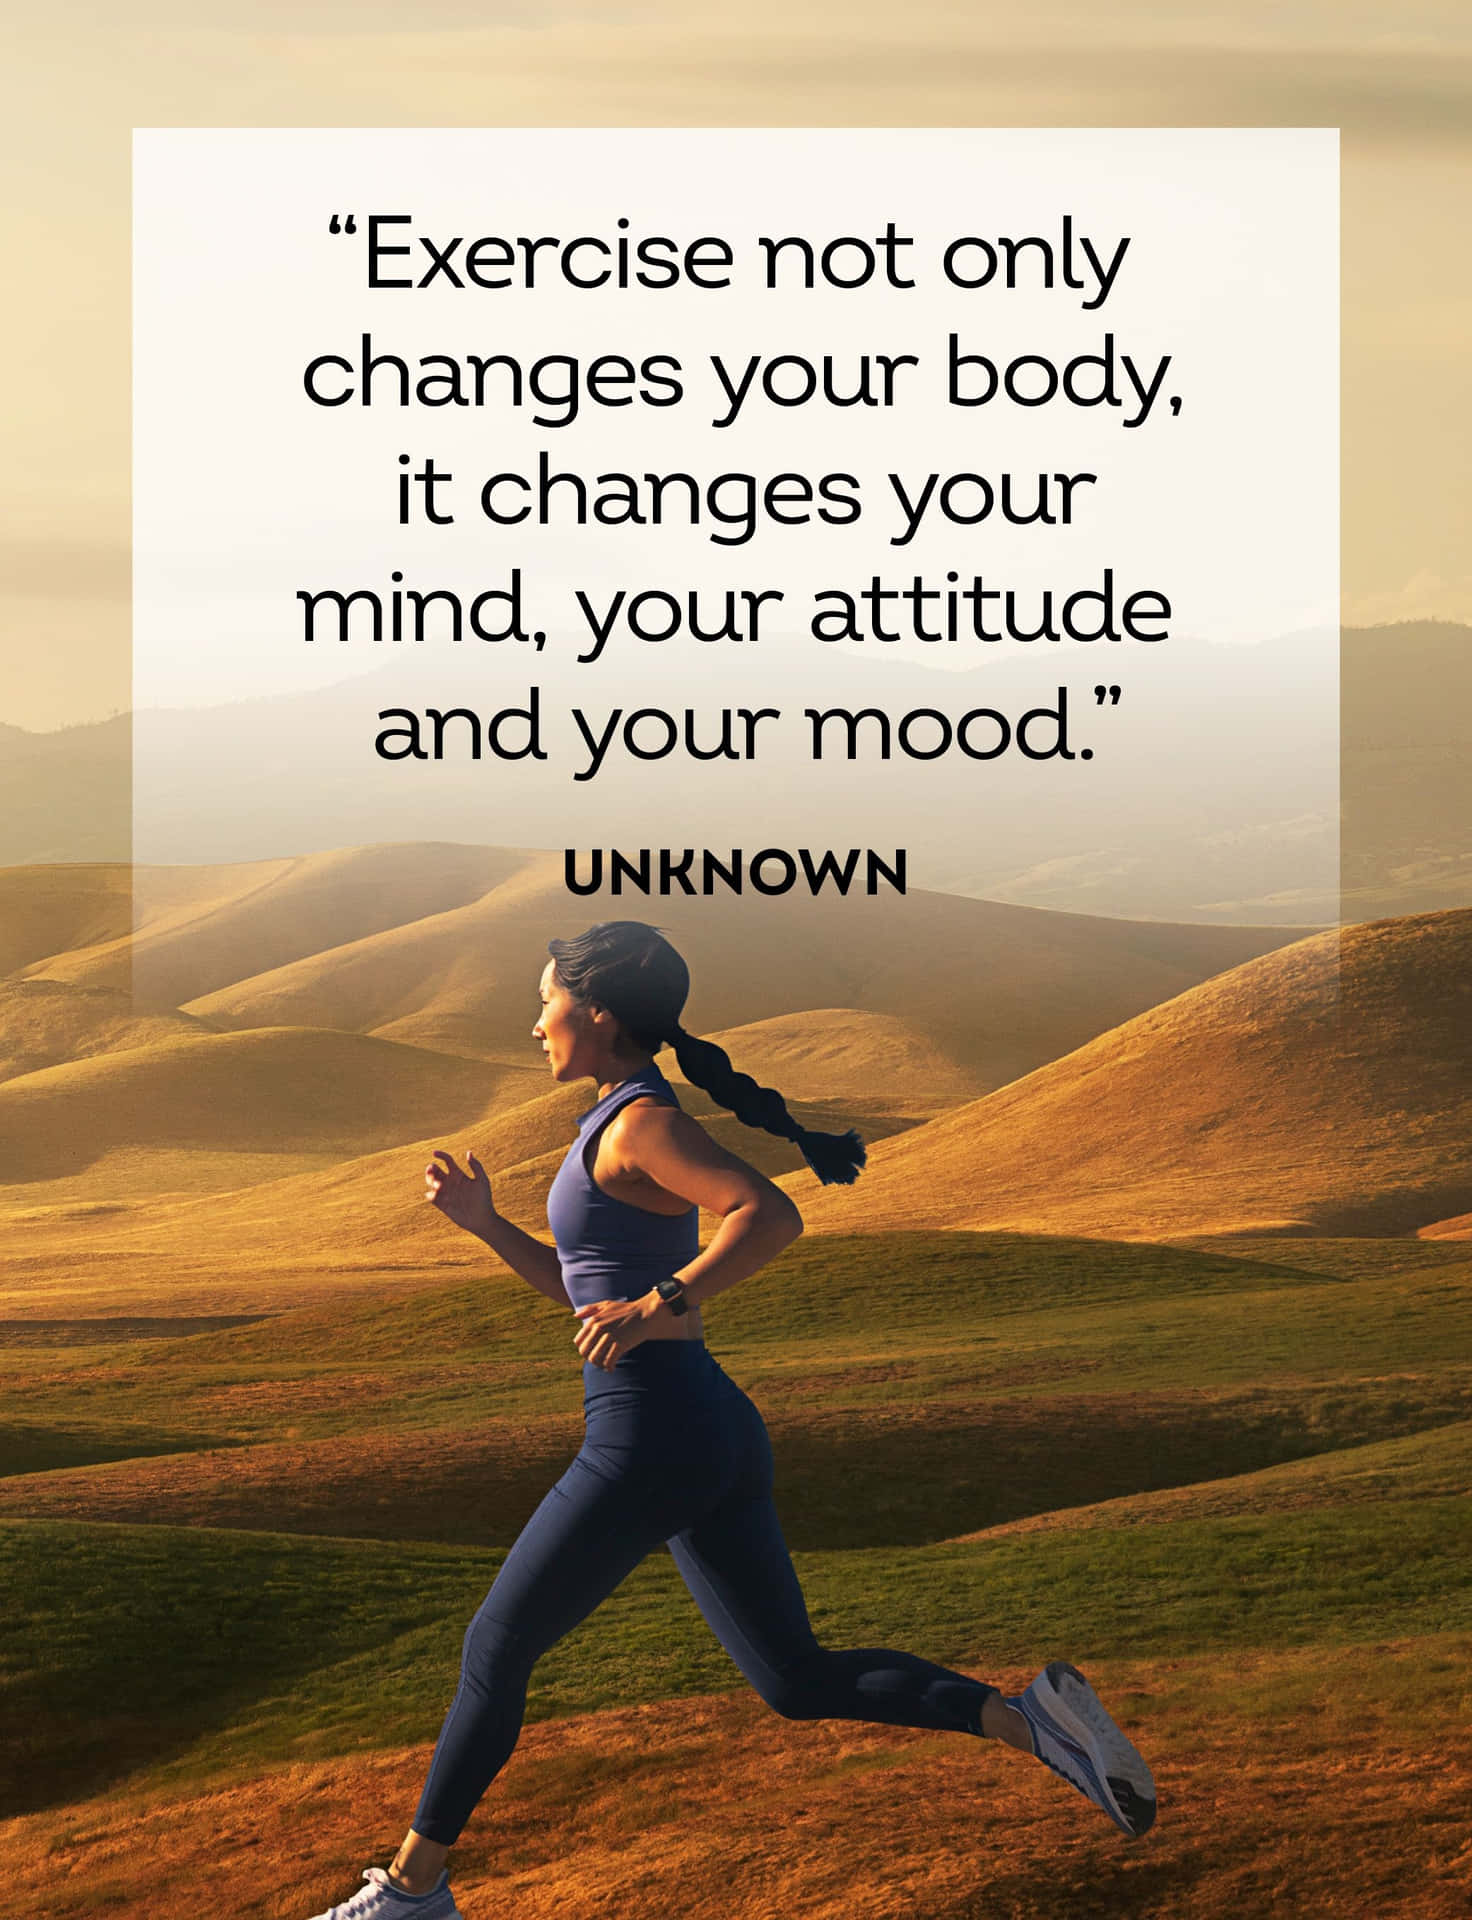 Inspirational Exercise Quote Running Landscape Wallpaper